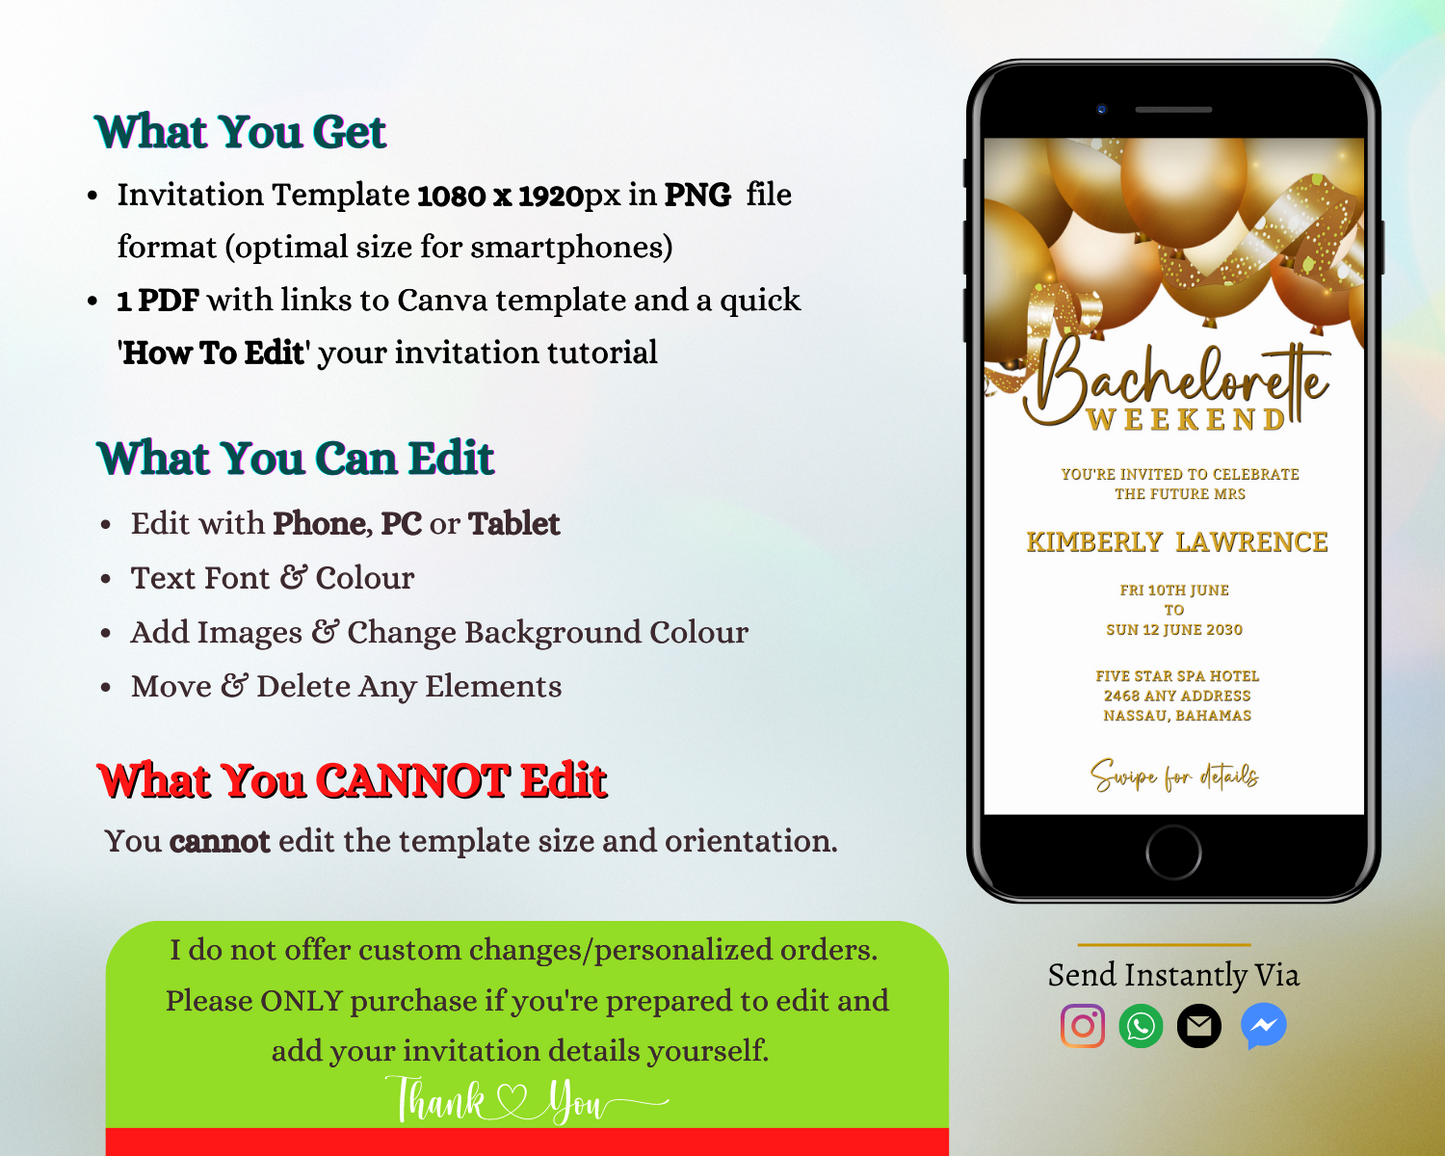 Customisable Digital Gold Floating Balloons White | Bachelorette Weekend Evite displayed on a smartphone screen with editable text and elements for personalization via Canva.